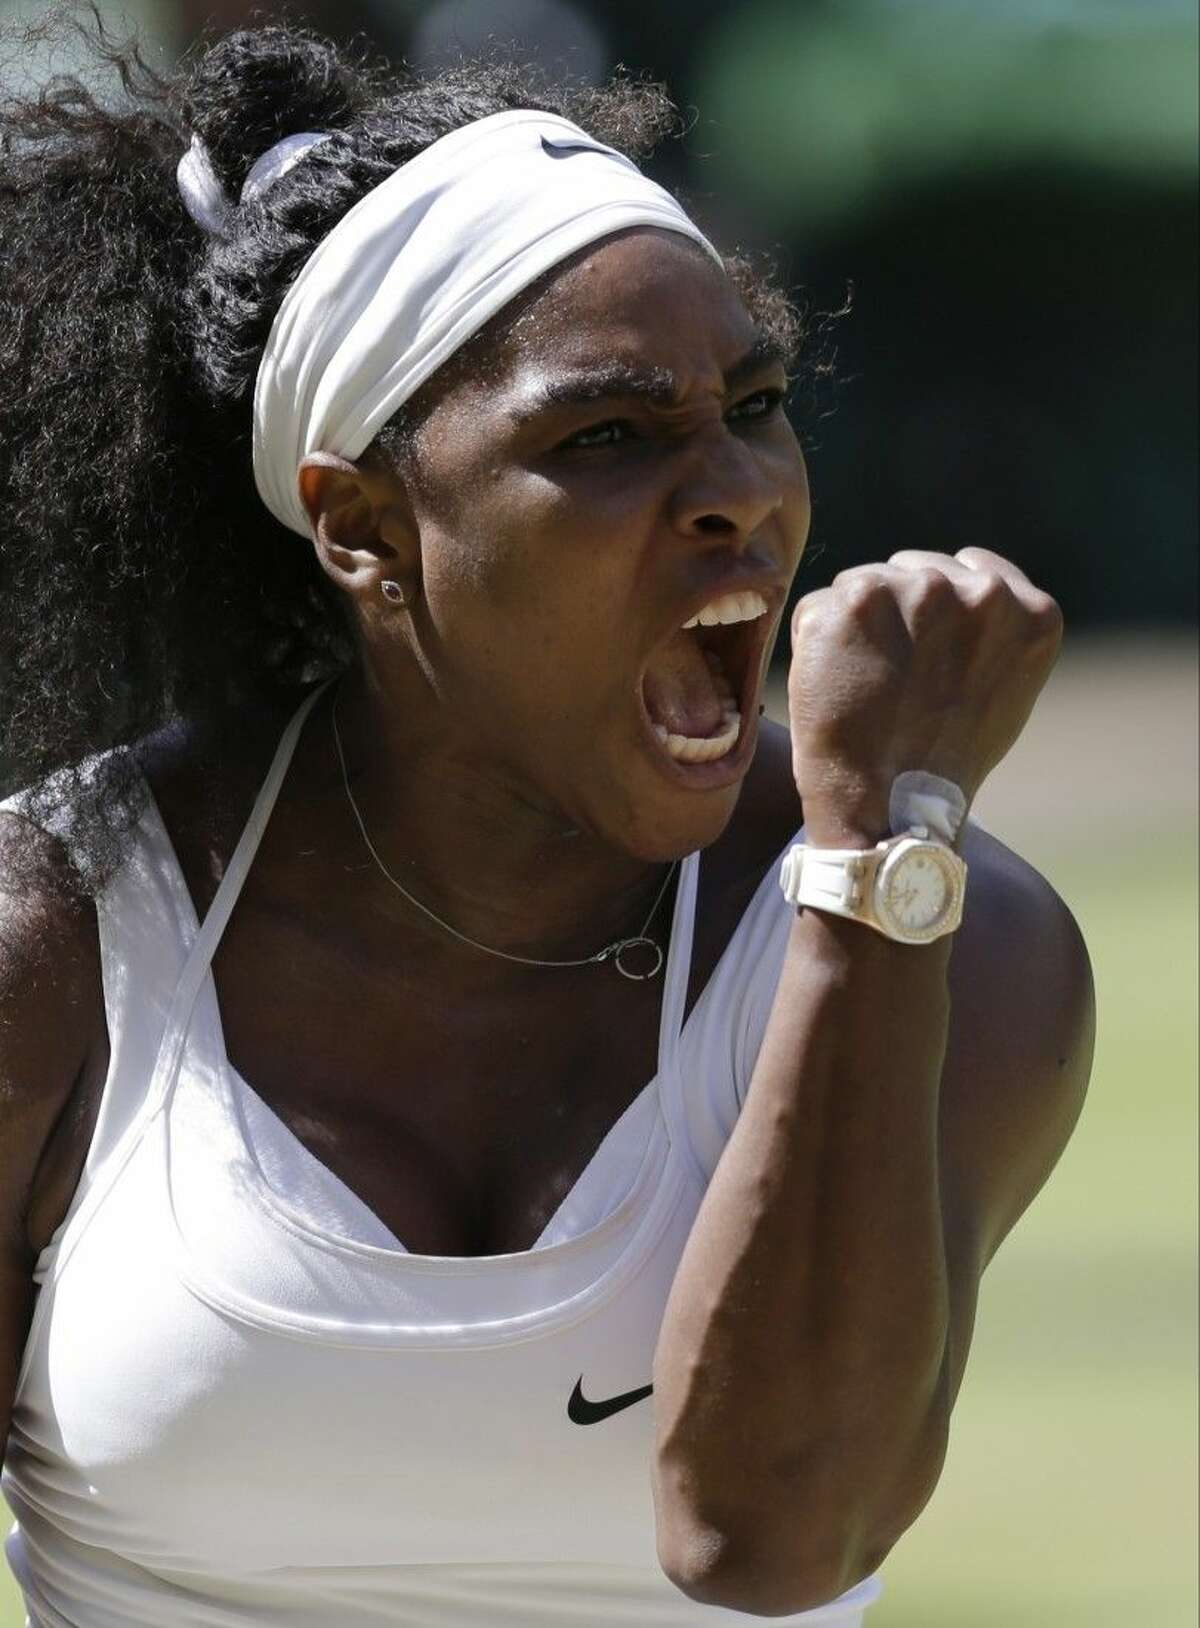 Serena Williams of the United States celebrates winning a point against Garbine Muguruza of Spain during the women's singles final at the All England Lawn Tennis Championships in Wimbledon, London, Saturday.